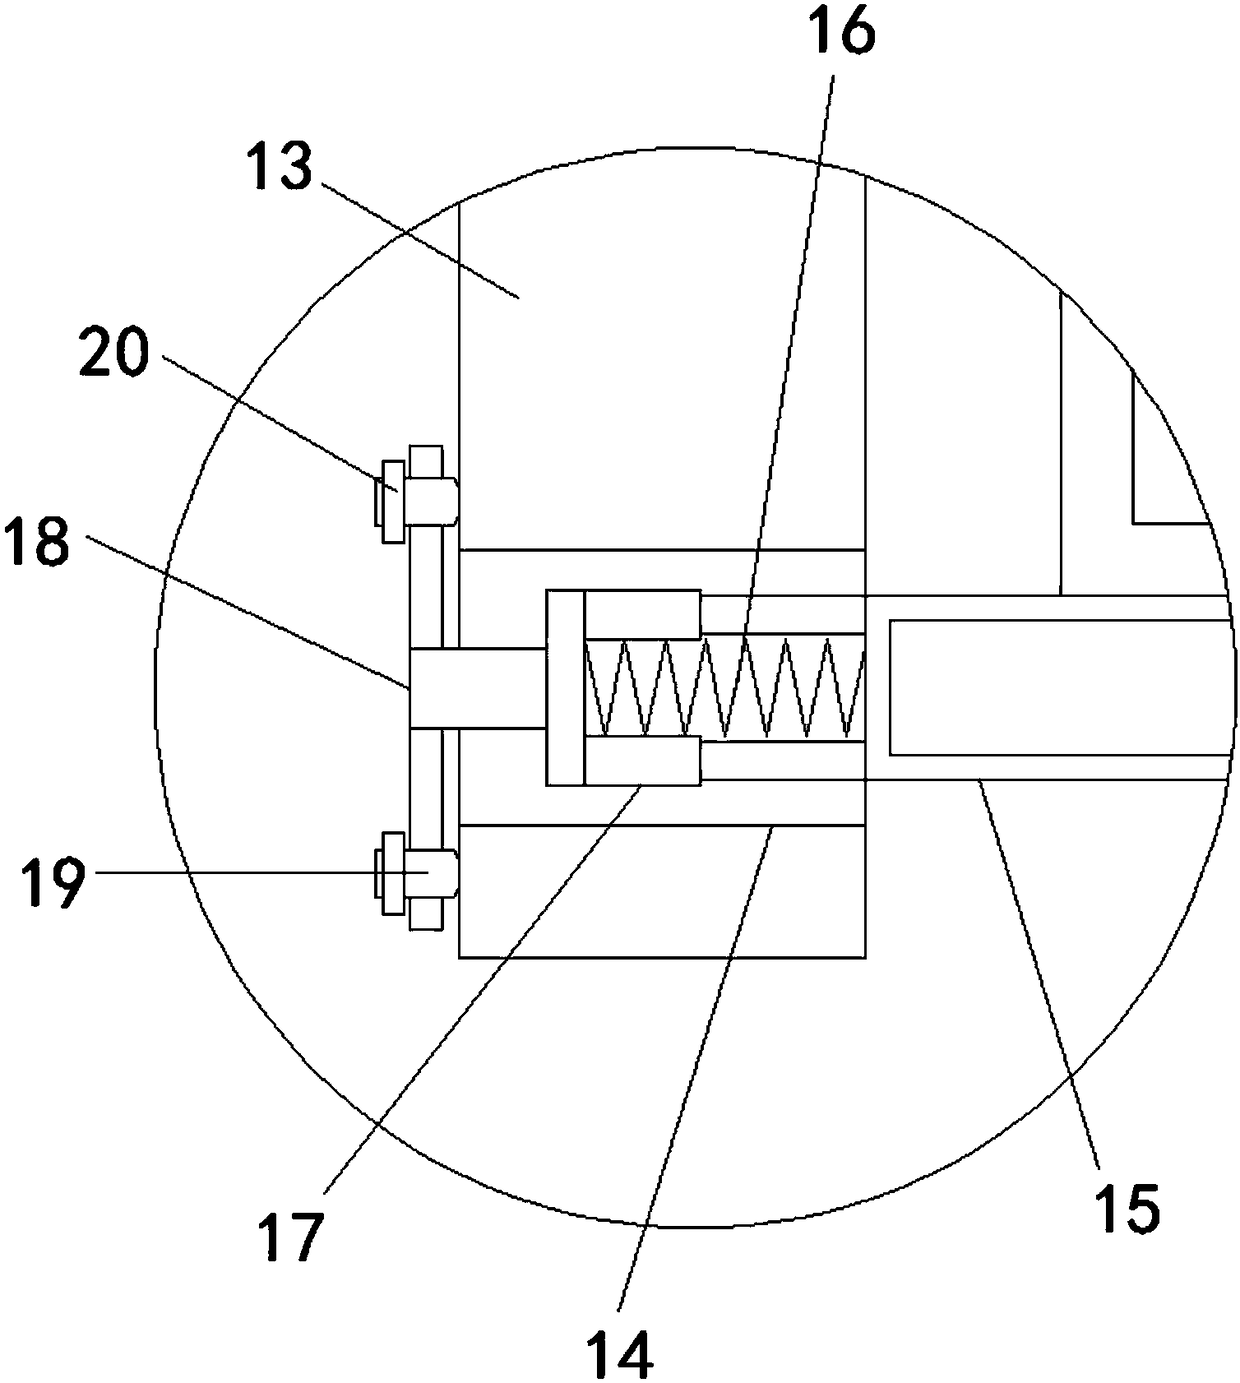 SMD (Surface Mounting Device) nut and circuit board assembly